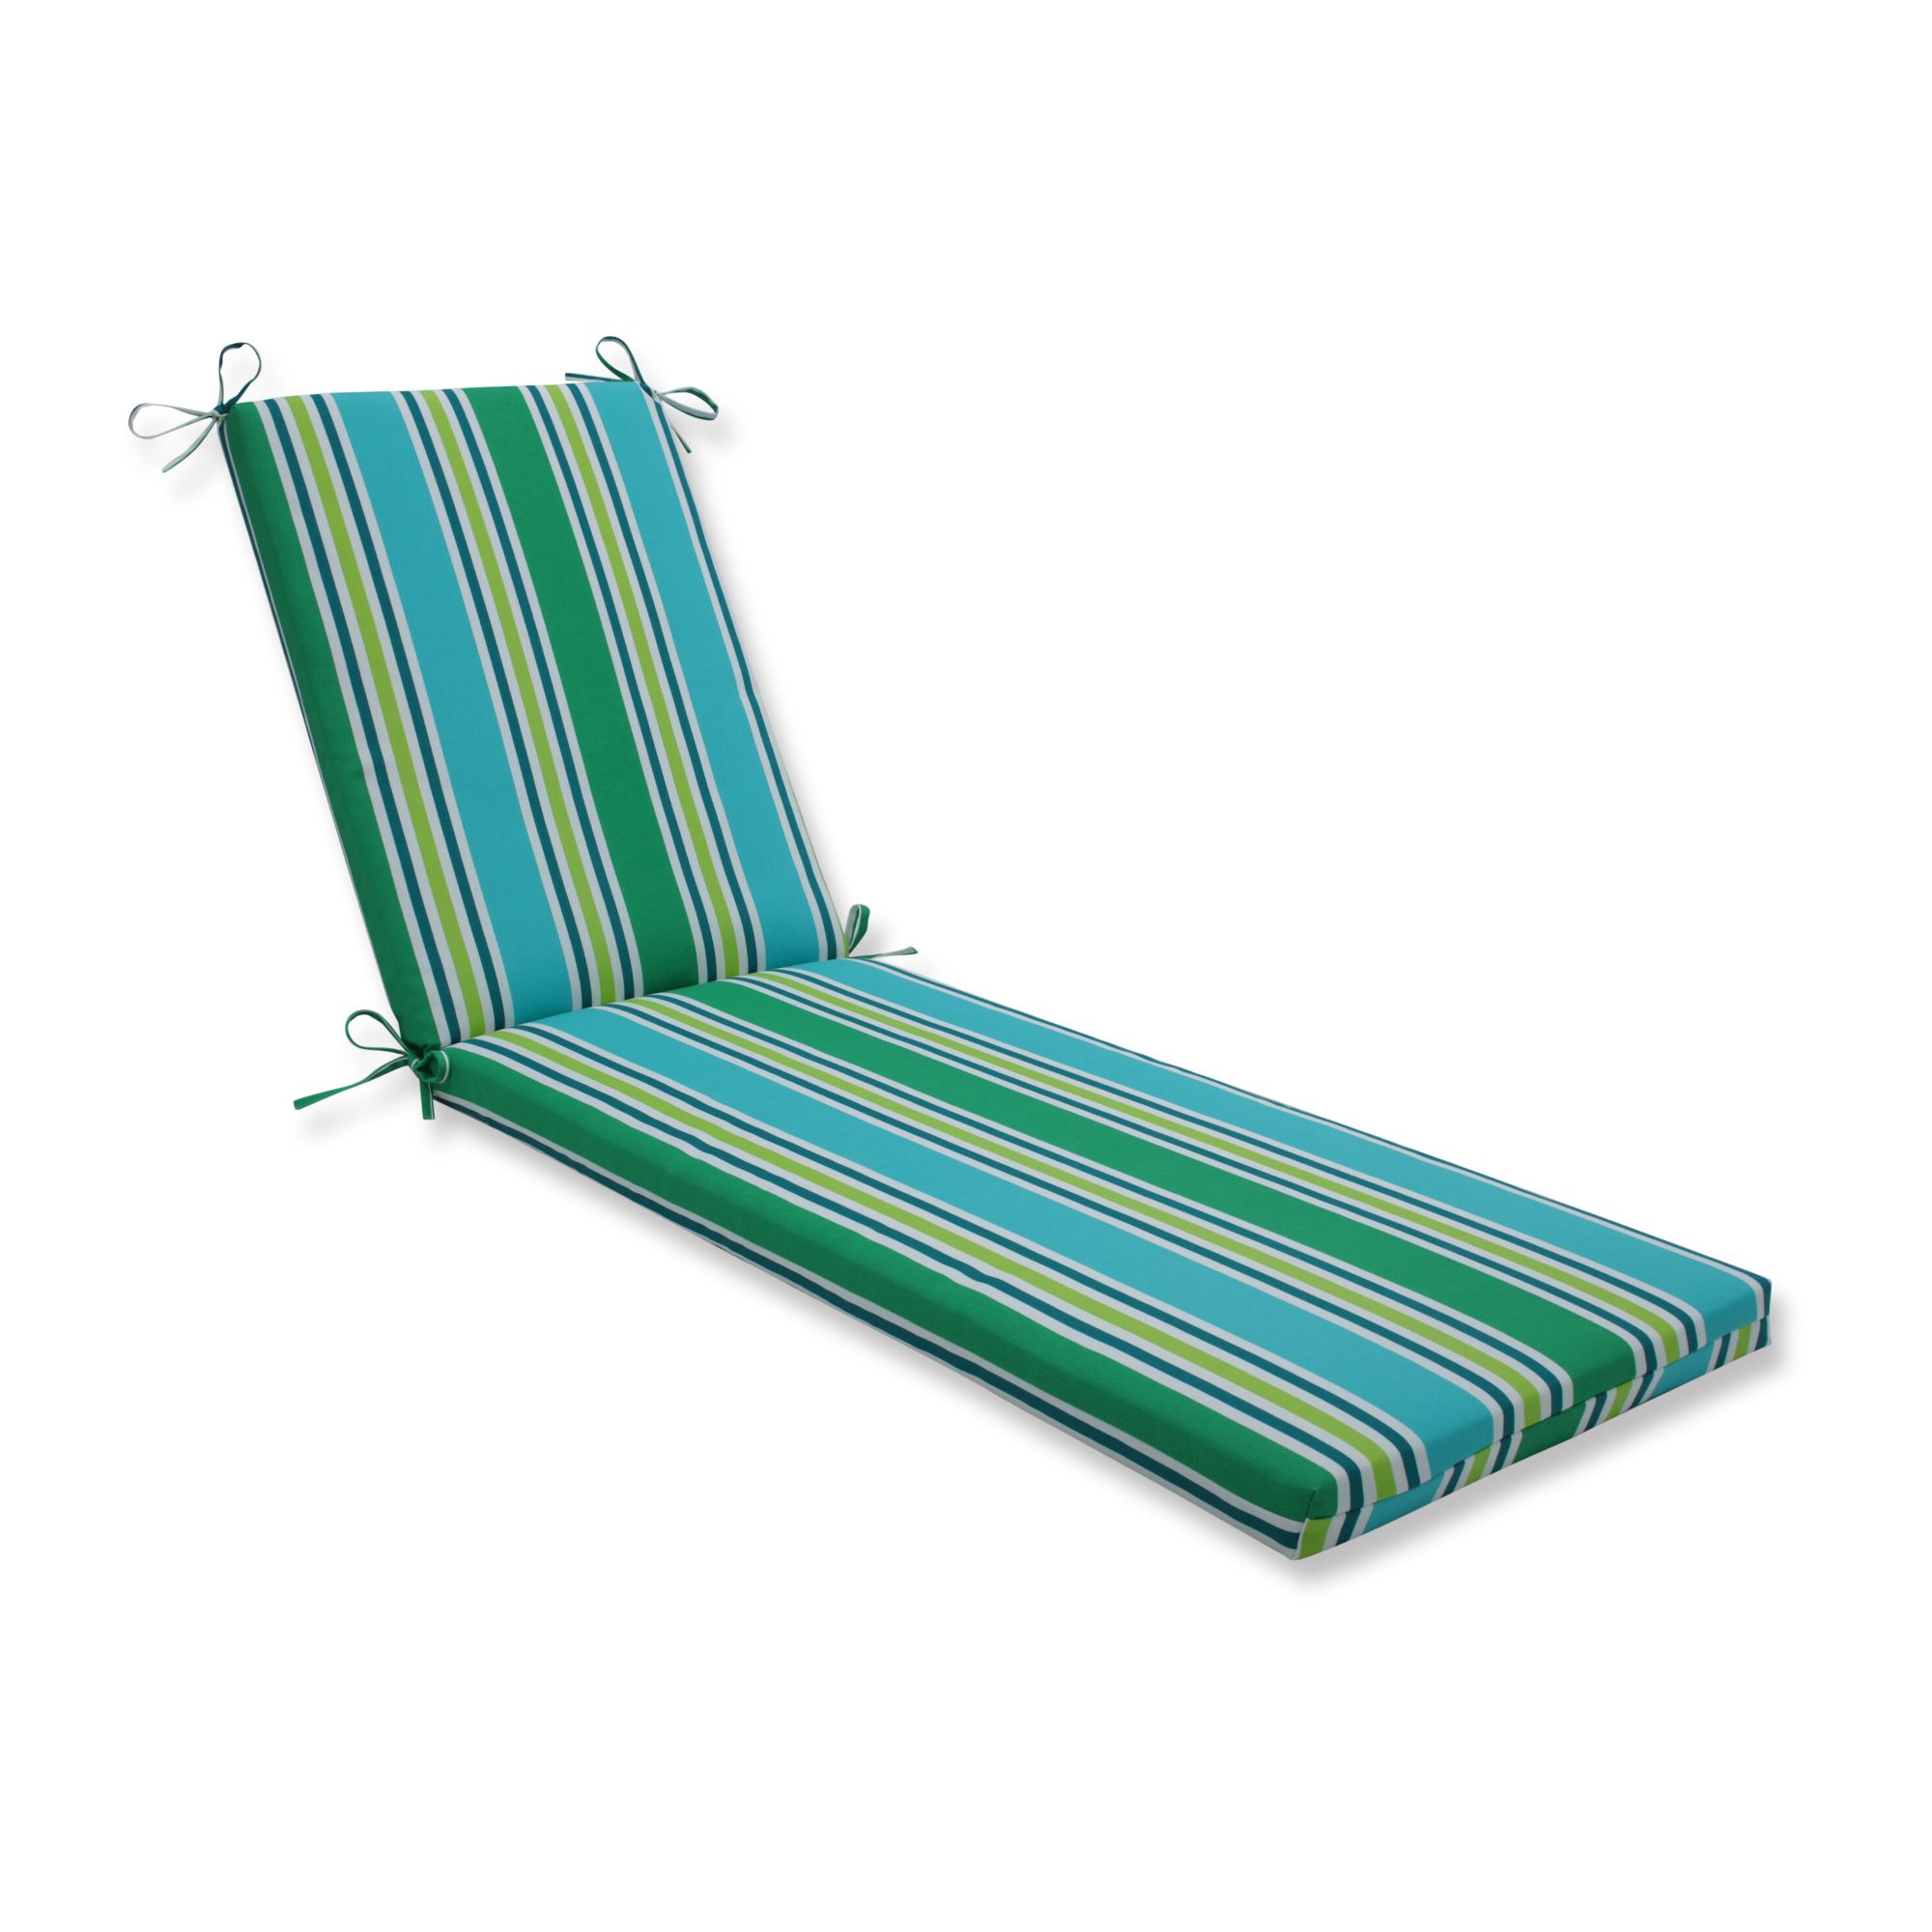 CC Outdoor Living 80" Blue and Green Striped UV Resistant Outdoor Patio Chaise Lounge Cushion